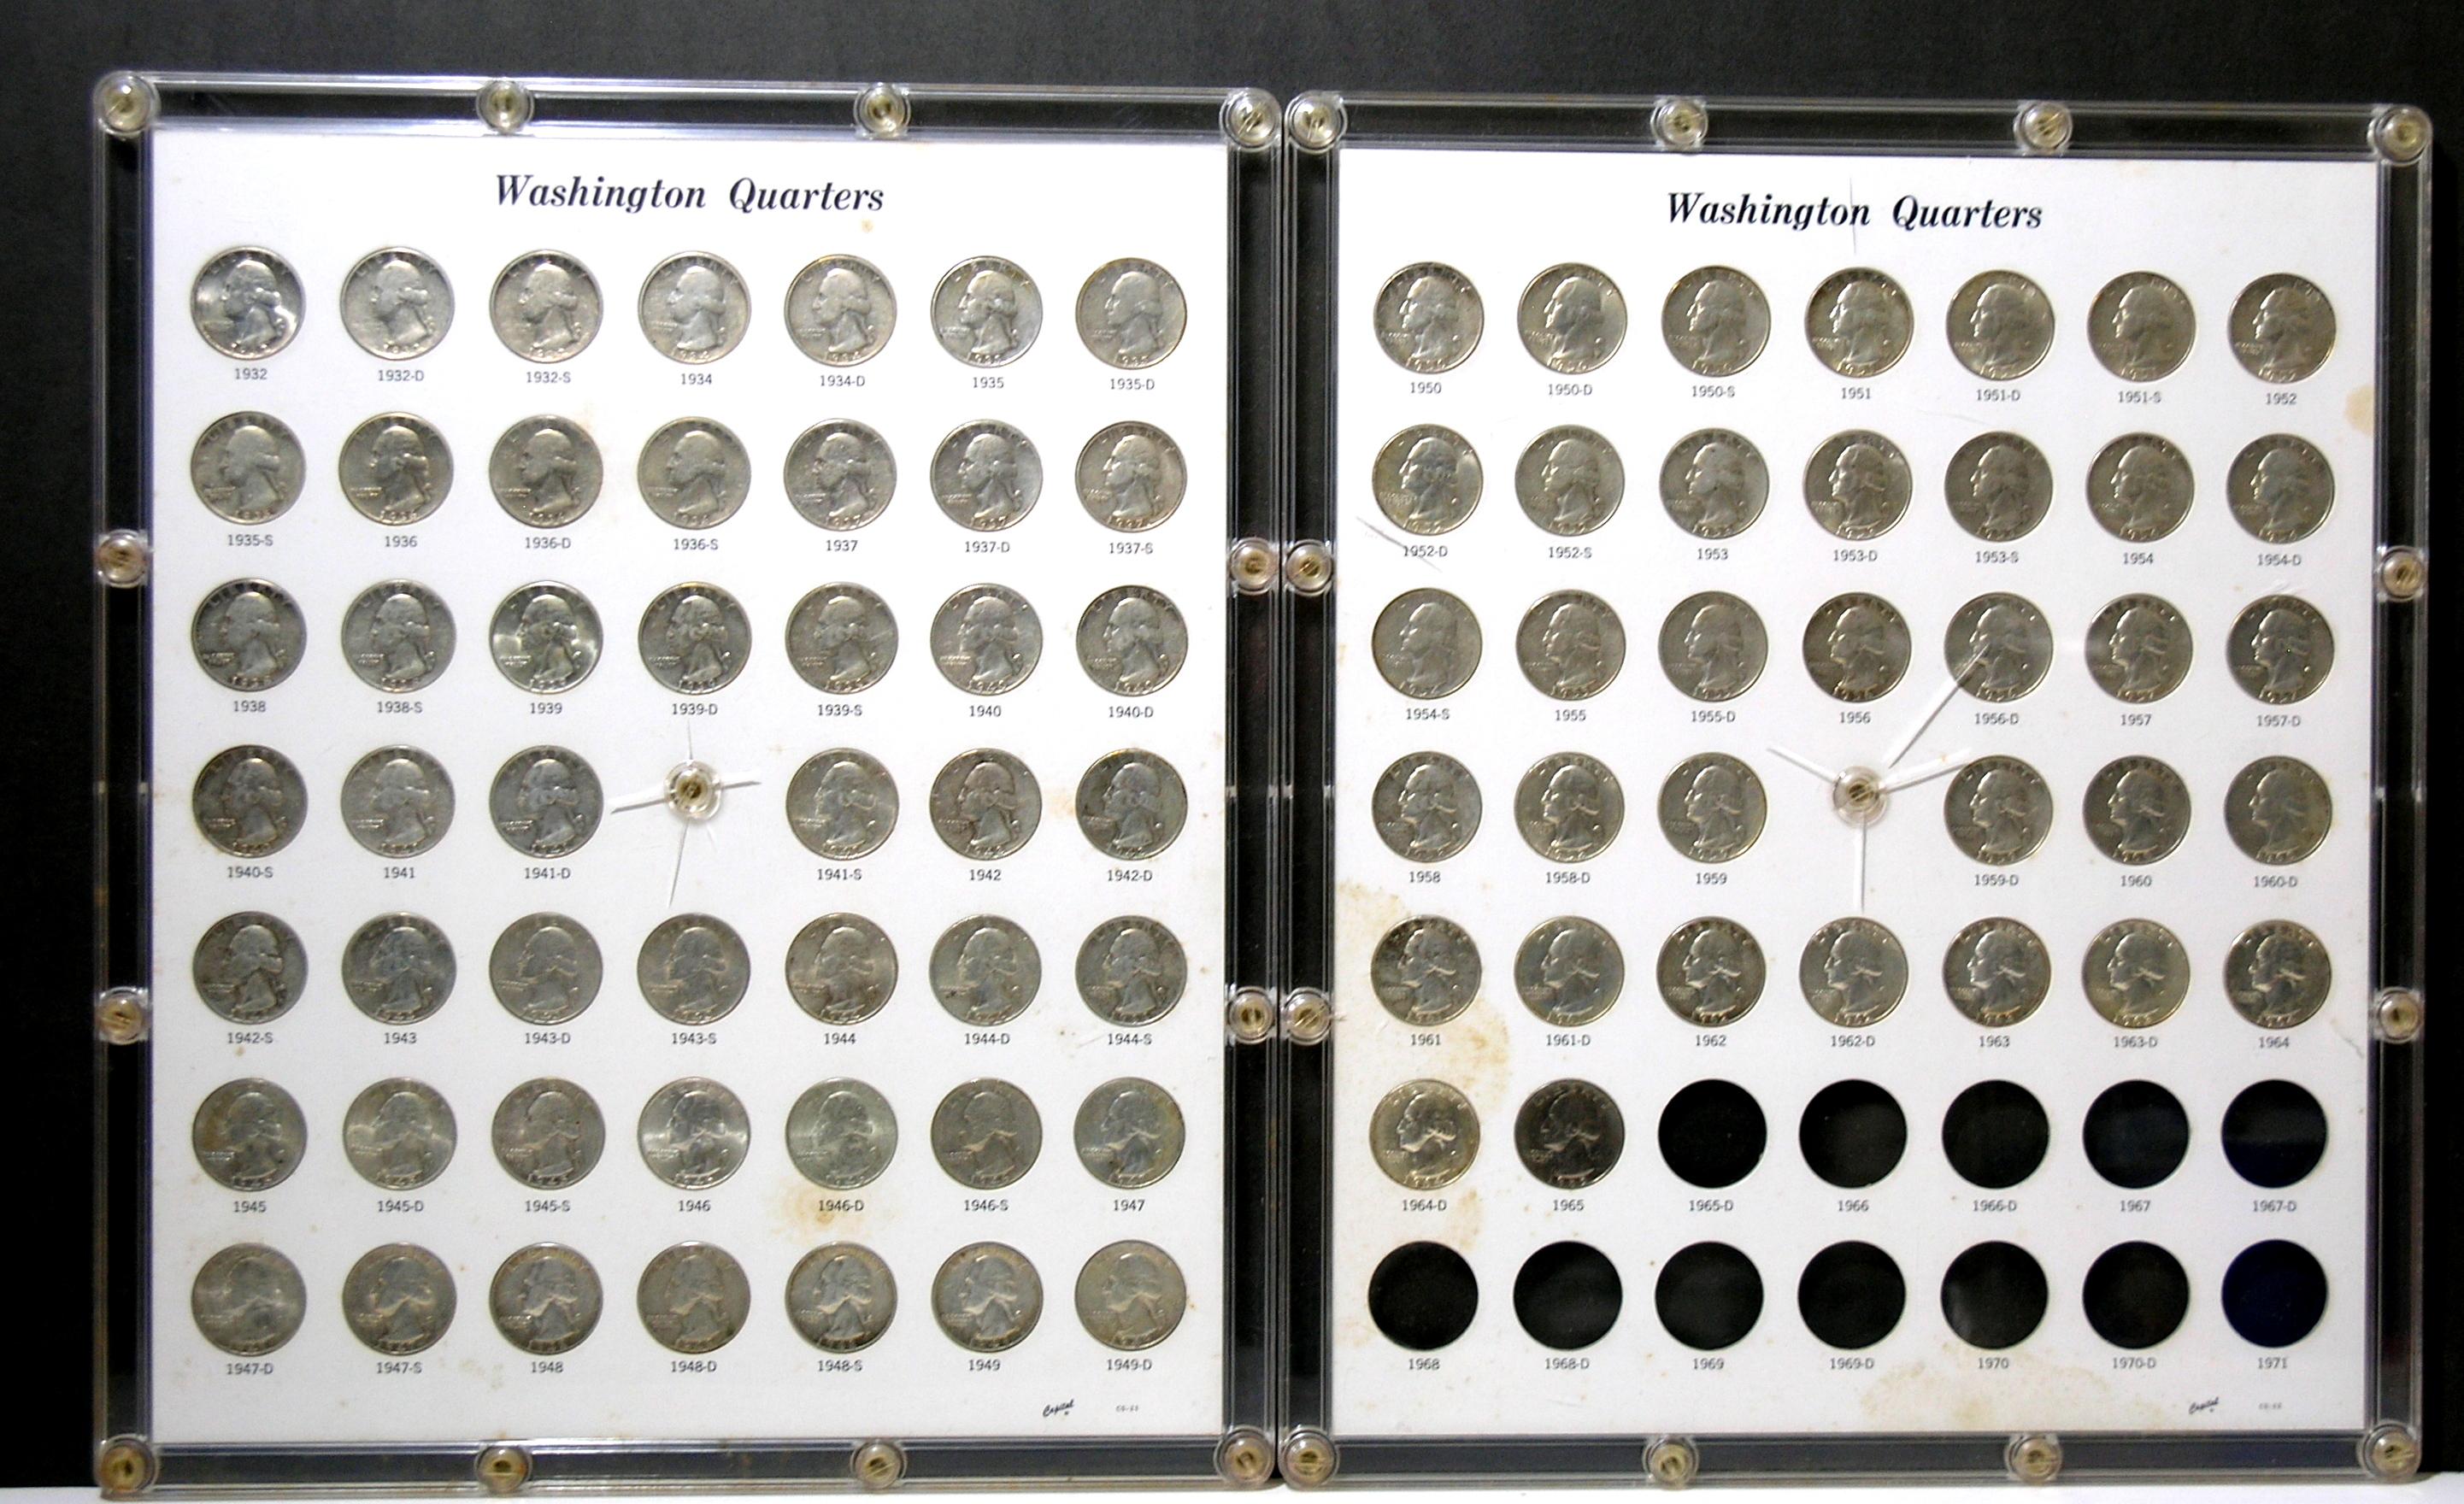 1932-1964 Washington Quarter Collection in Hard Plastic Holders. Includes K